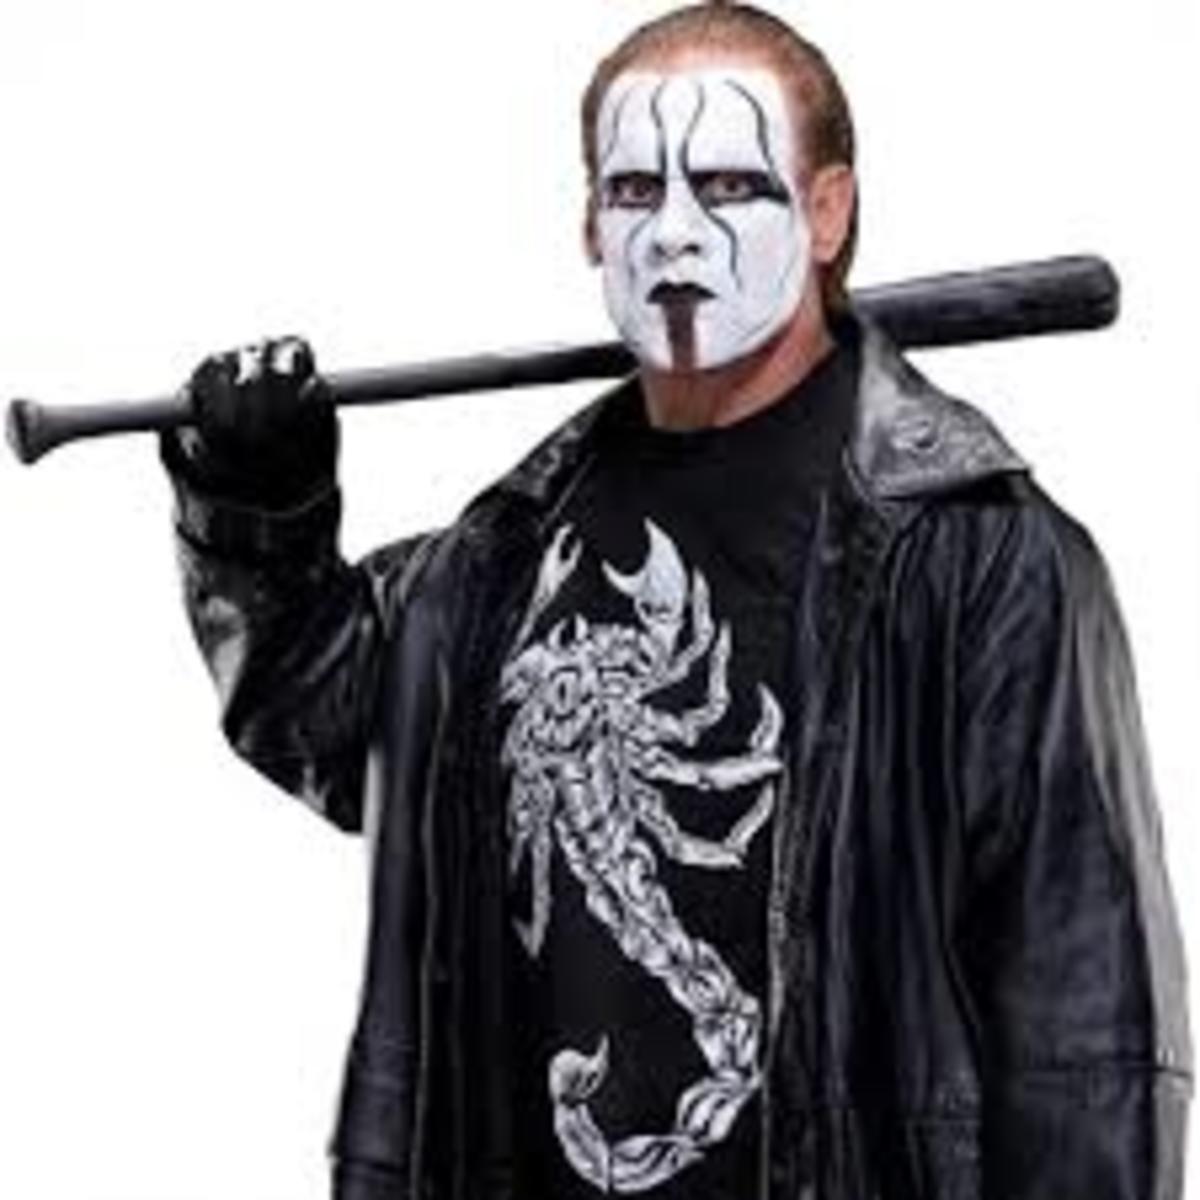 Sting headlines this year's class of WWE HOF inductees